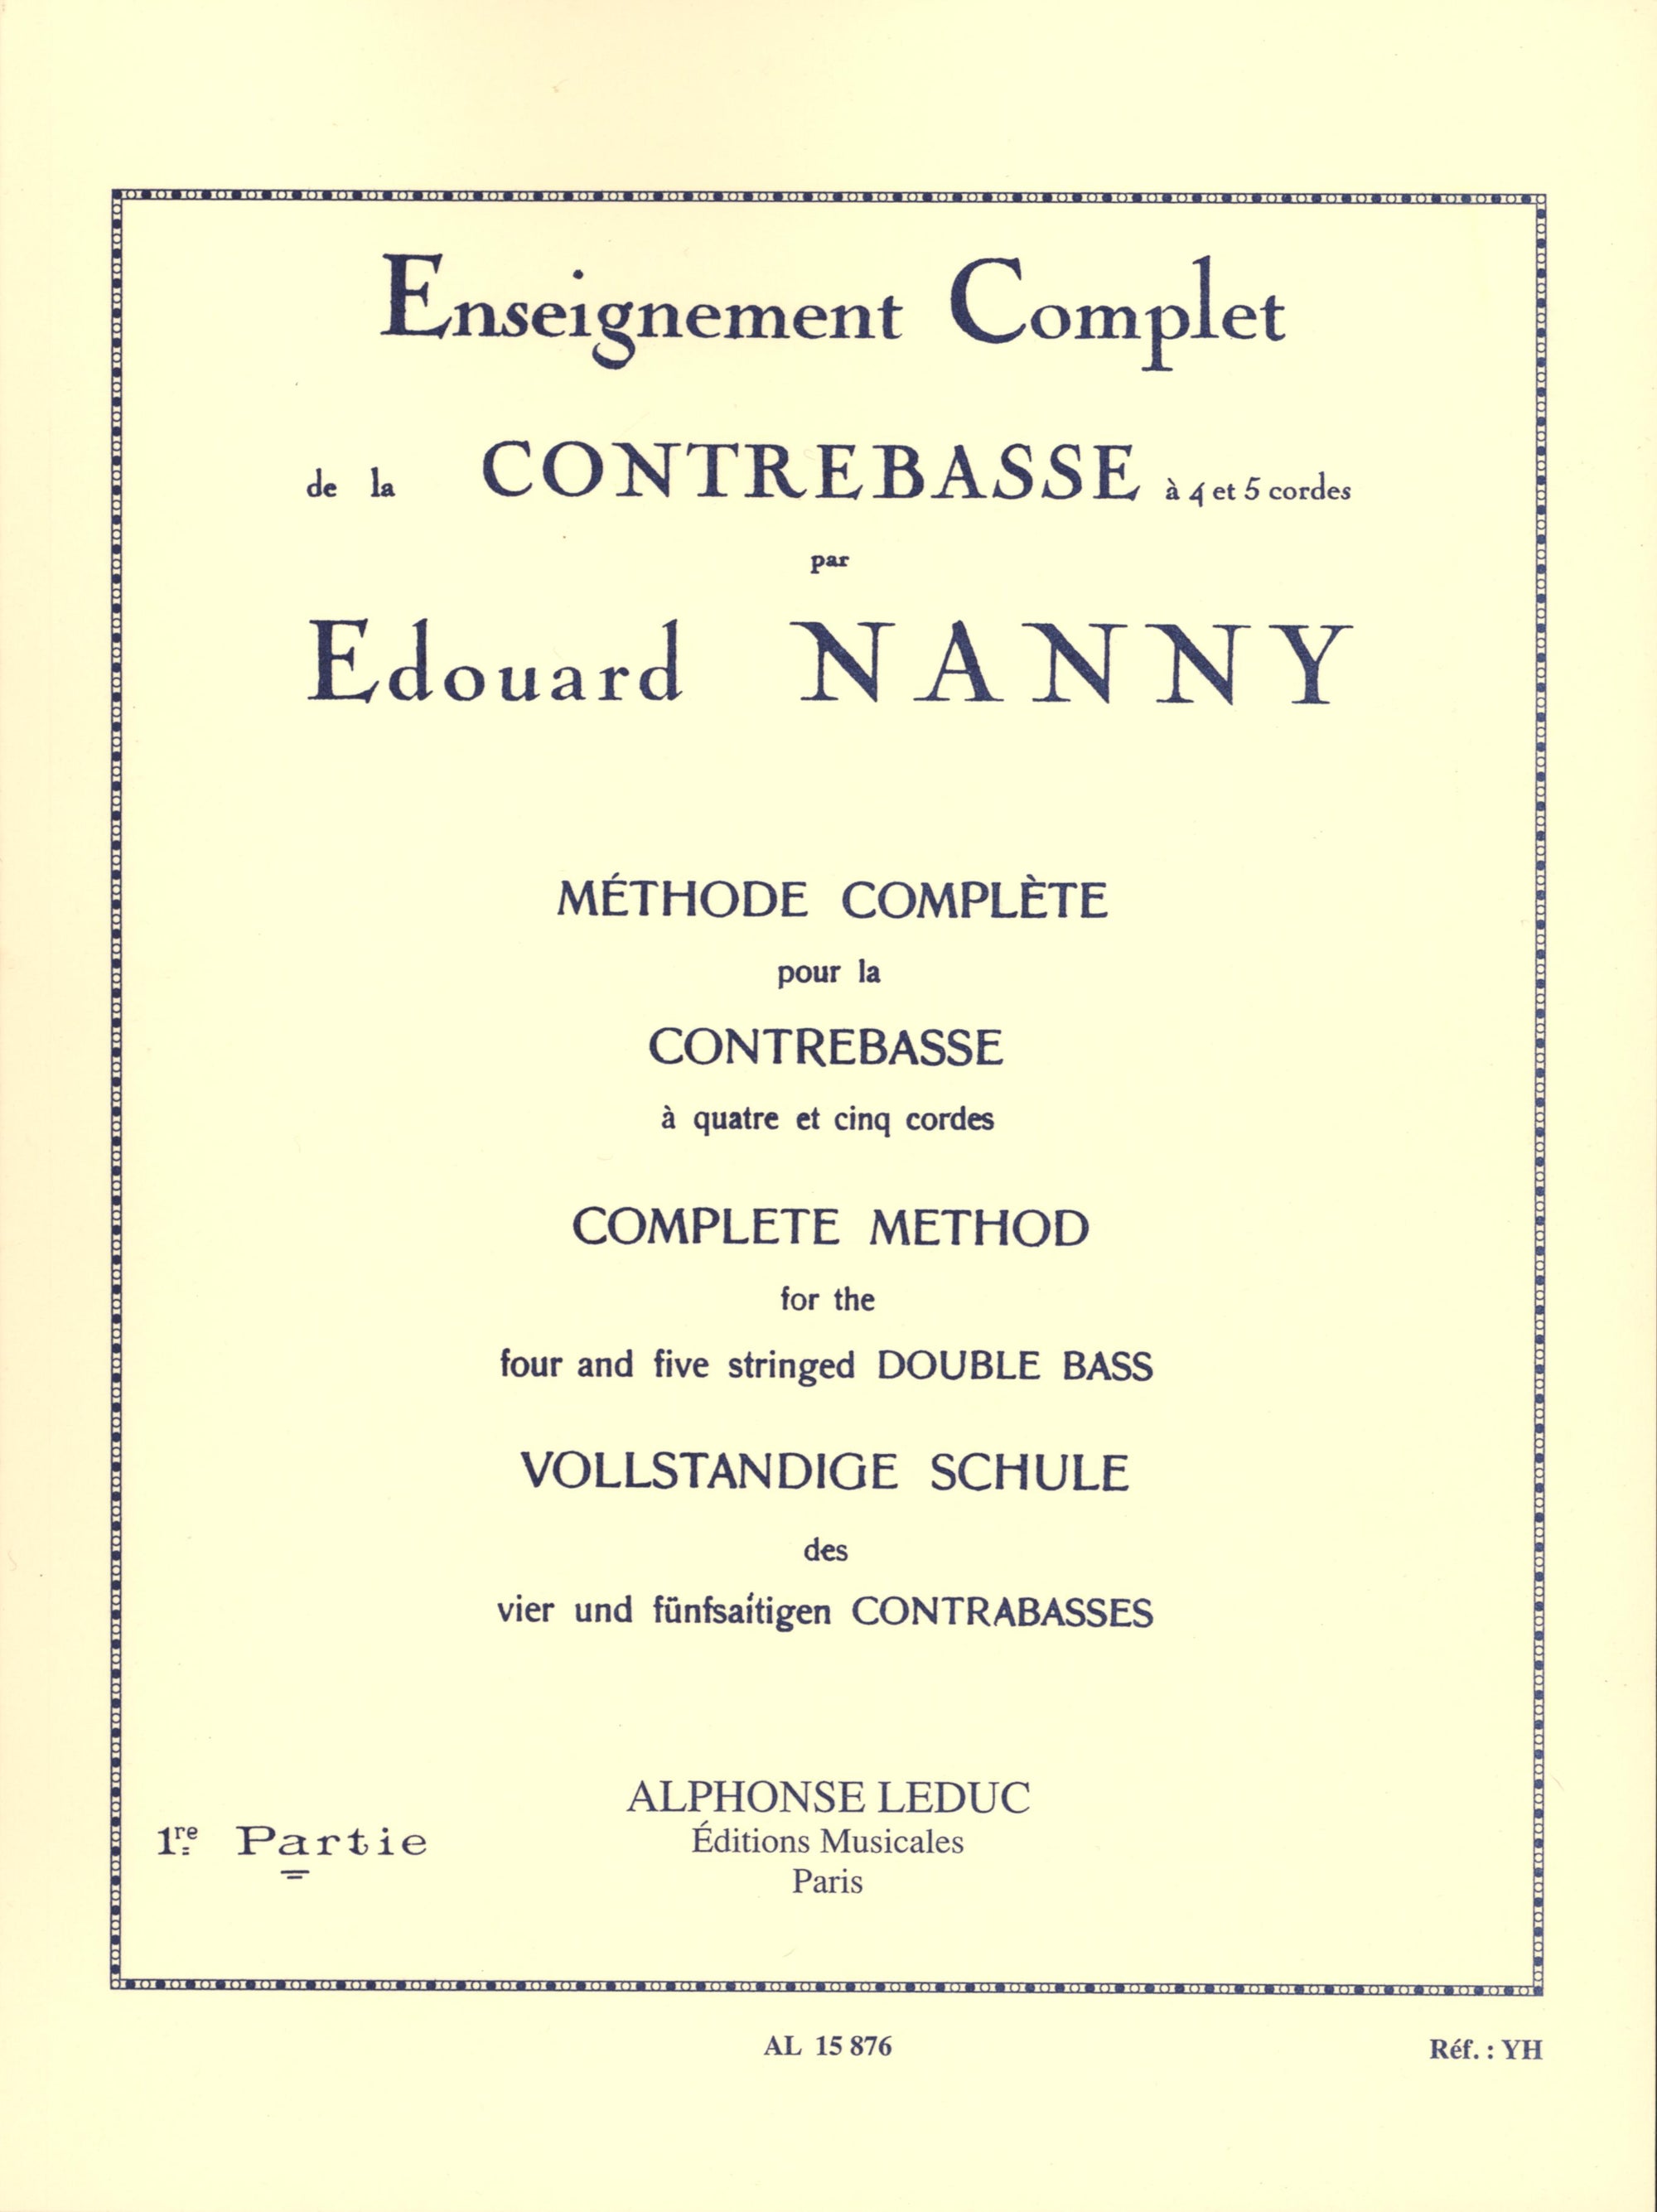 Nanny: Complete Double Bass Method - Volume 1